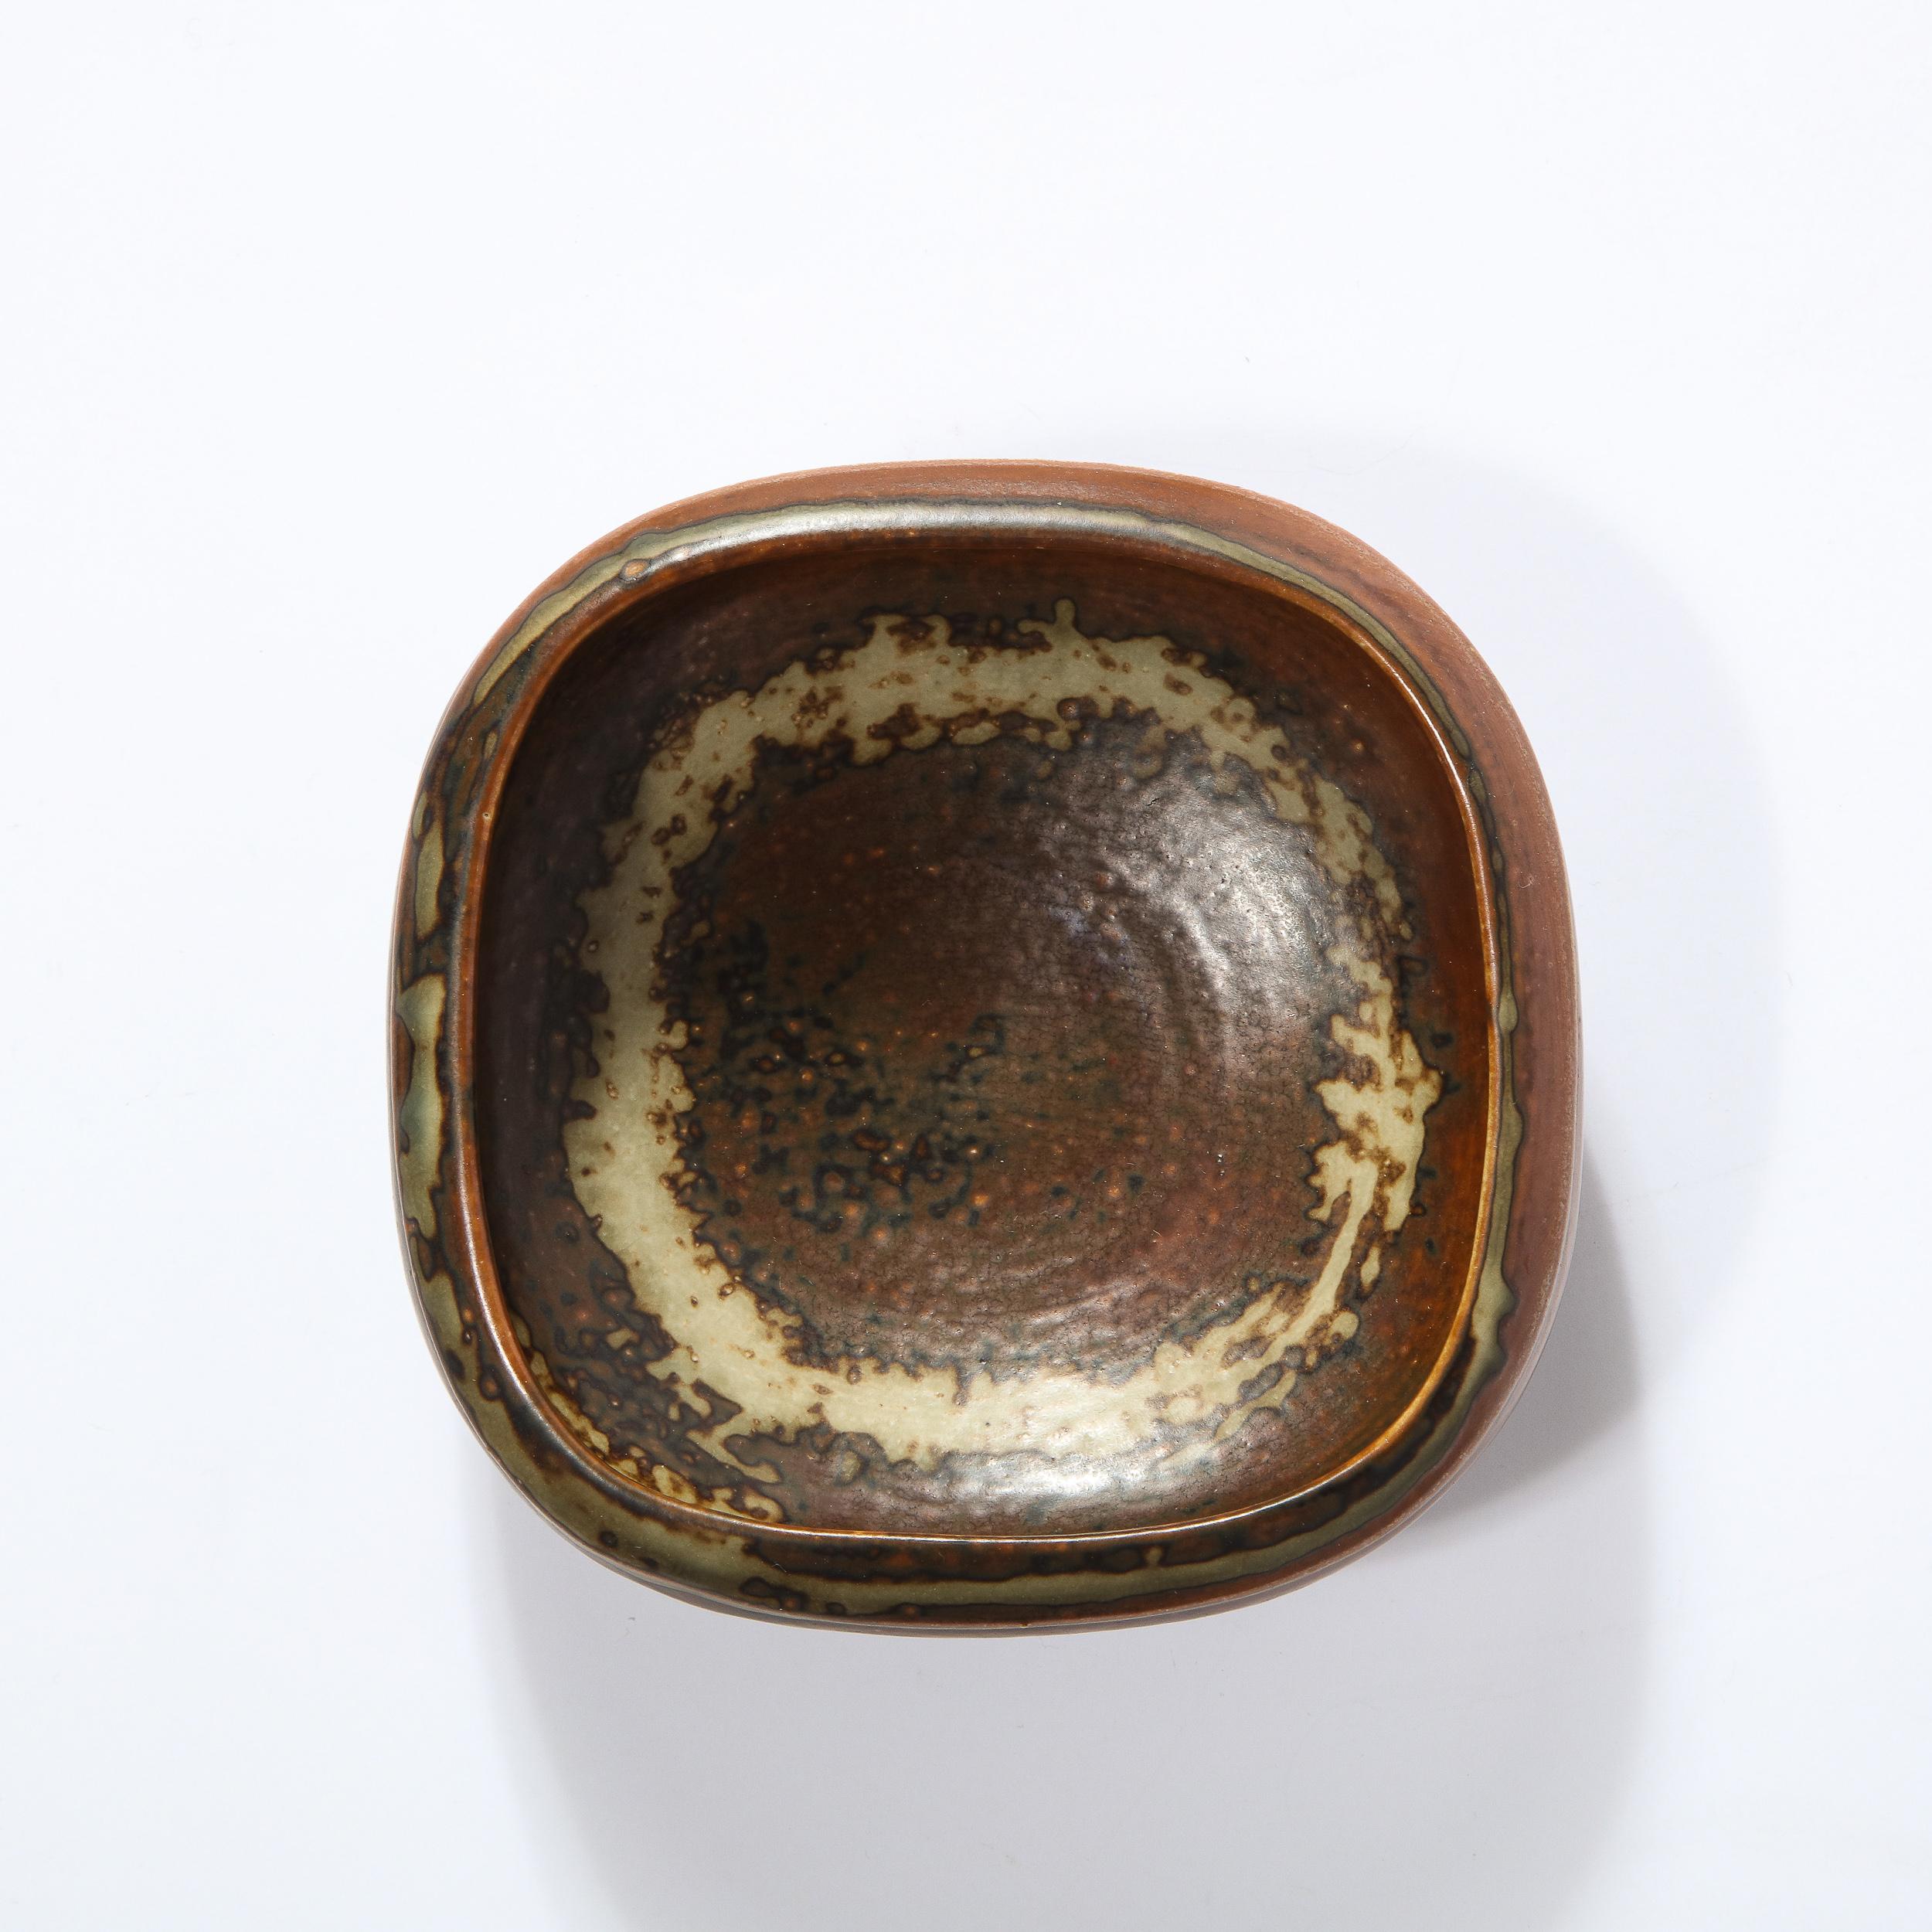 This gorgeous stoneware bowl in shades of brown, taupe and umber is hand wrought by Bode Willumsen for Royal Copenhagen wonderful hand glazed textural organic pattern. This piece is signed Royal Copenhagen, Denmark and numbered as well. A great